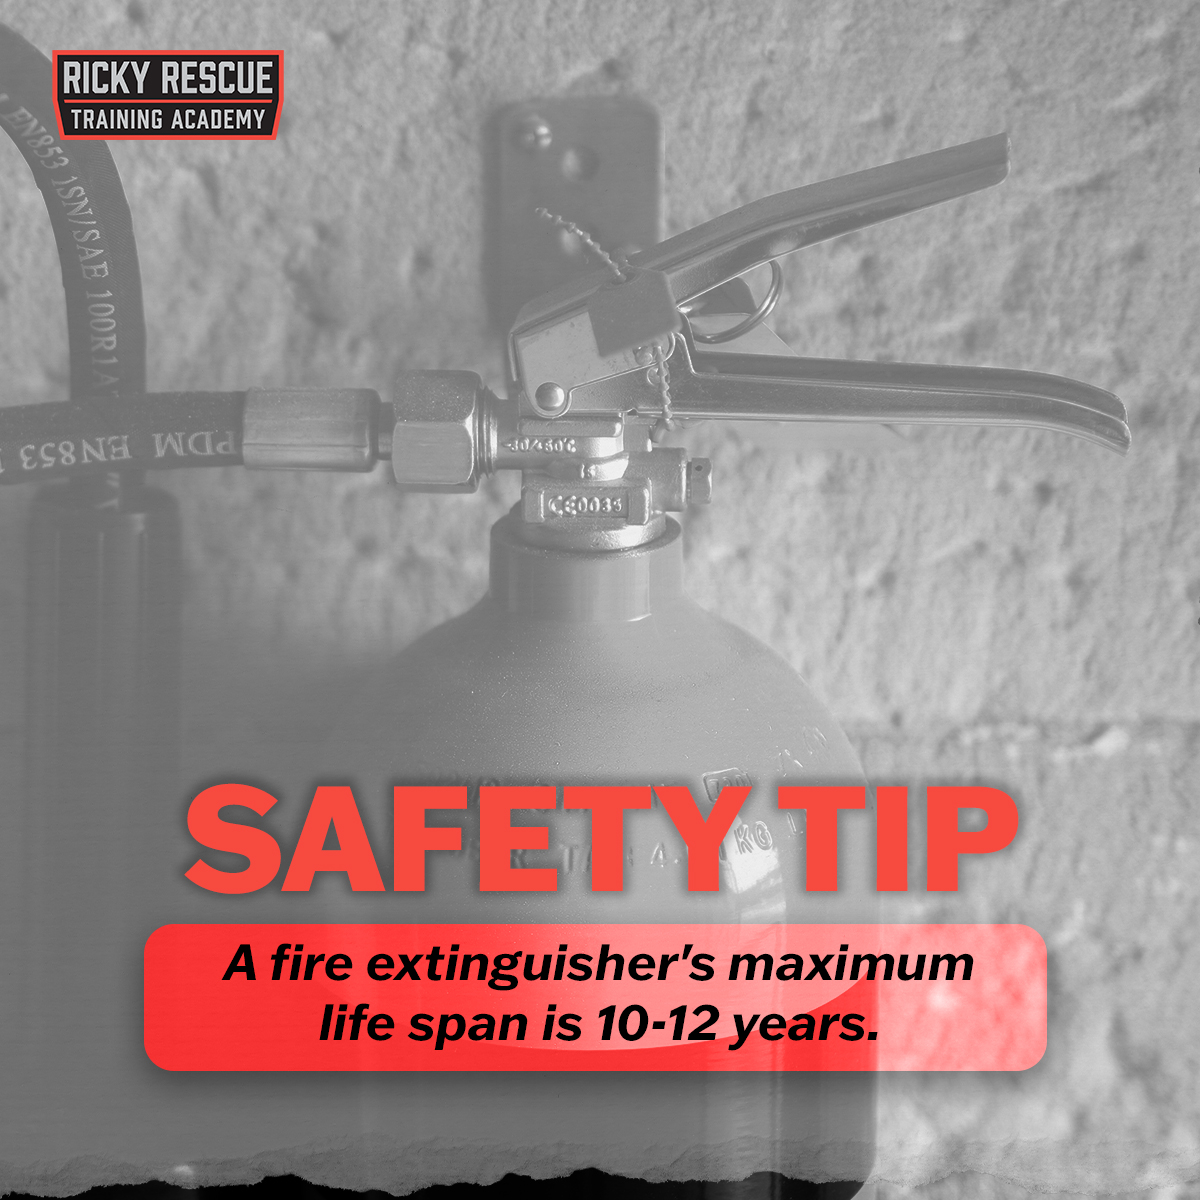 Fire Safety Tip: 🔥 Did you know the maximum life span of fire extinguishers is 10-12 years? Ensure your safety equipment is undamaged. If it's time for a replacement, make the switch today. 

#FireSafety #RickyRescue #FireExtinguishers